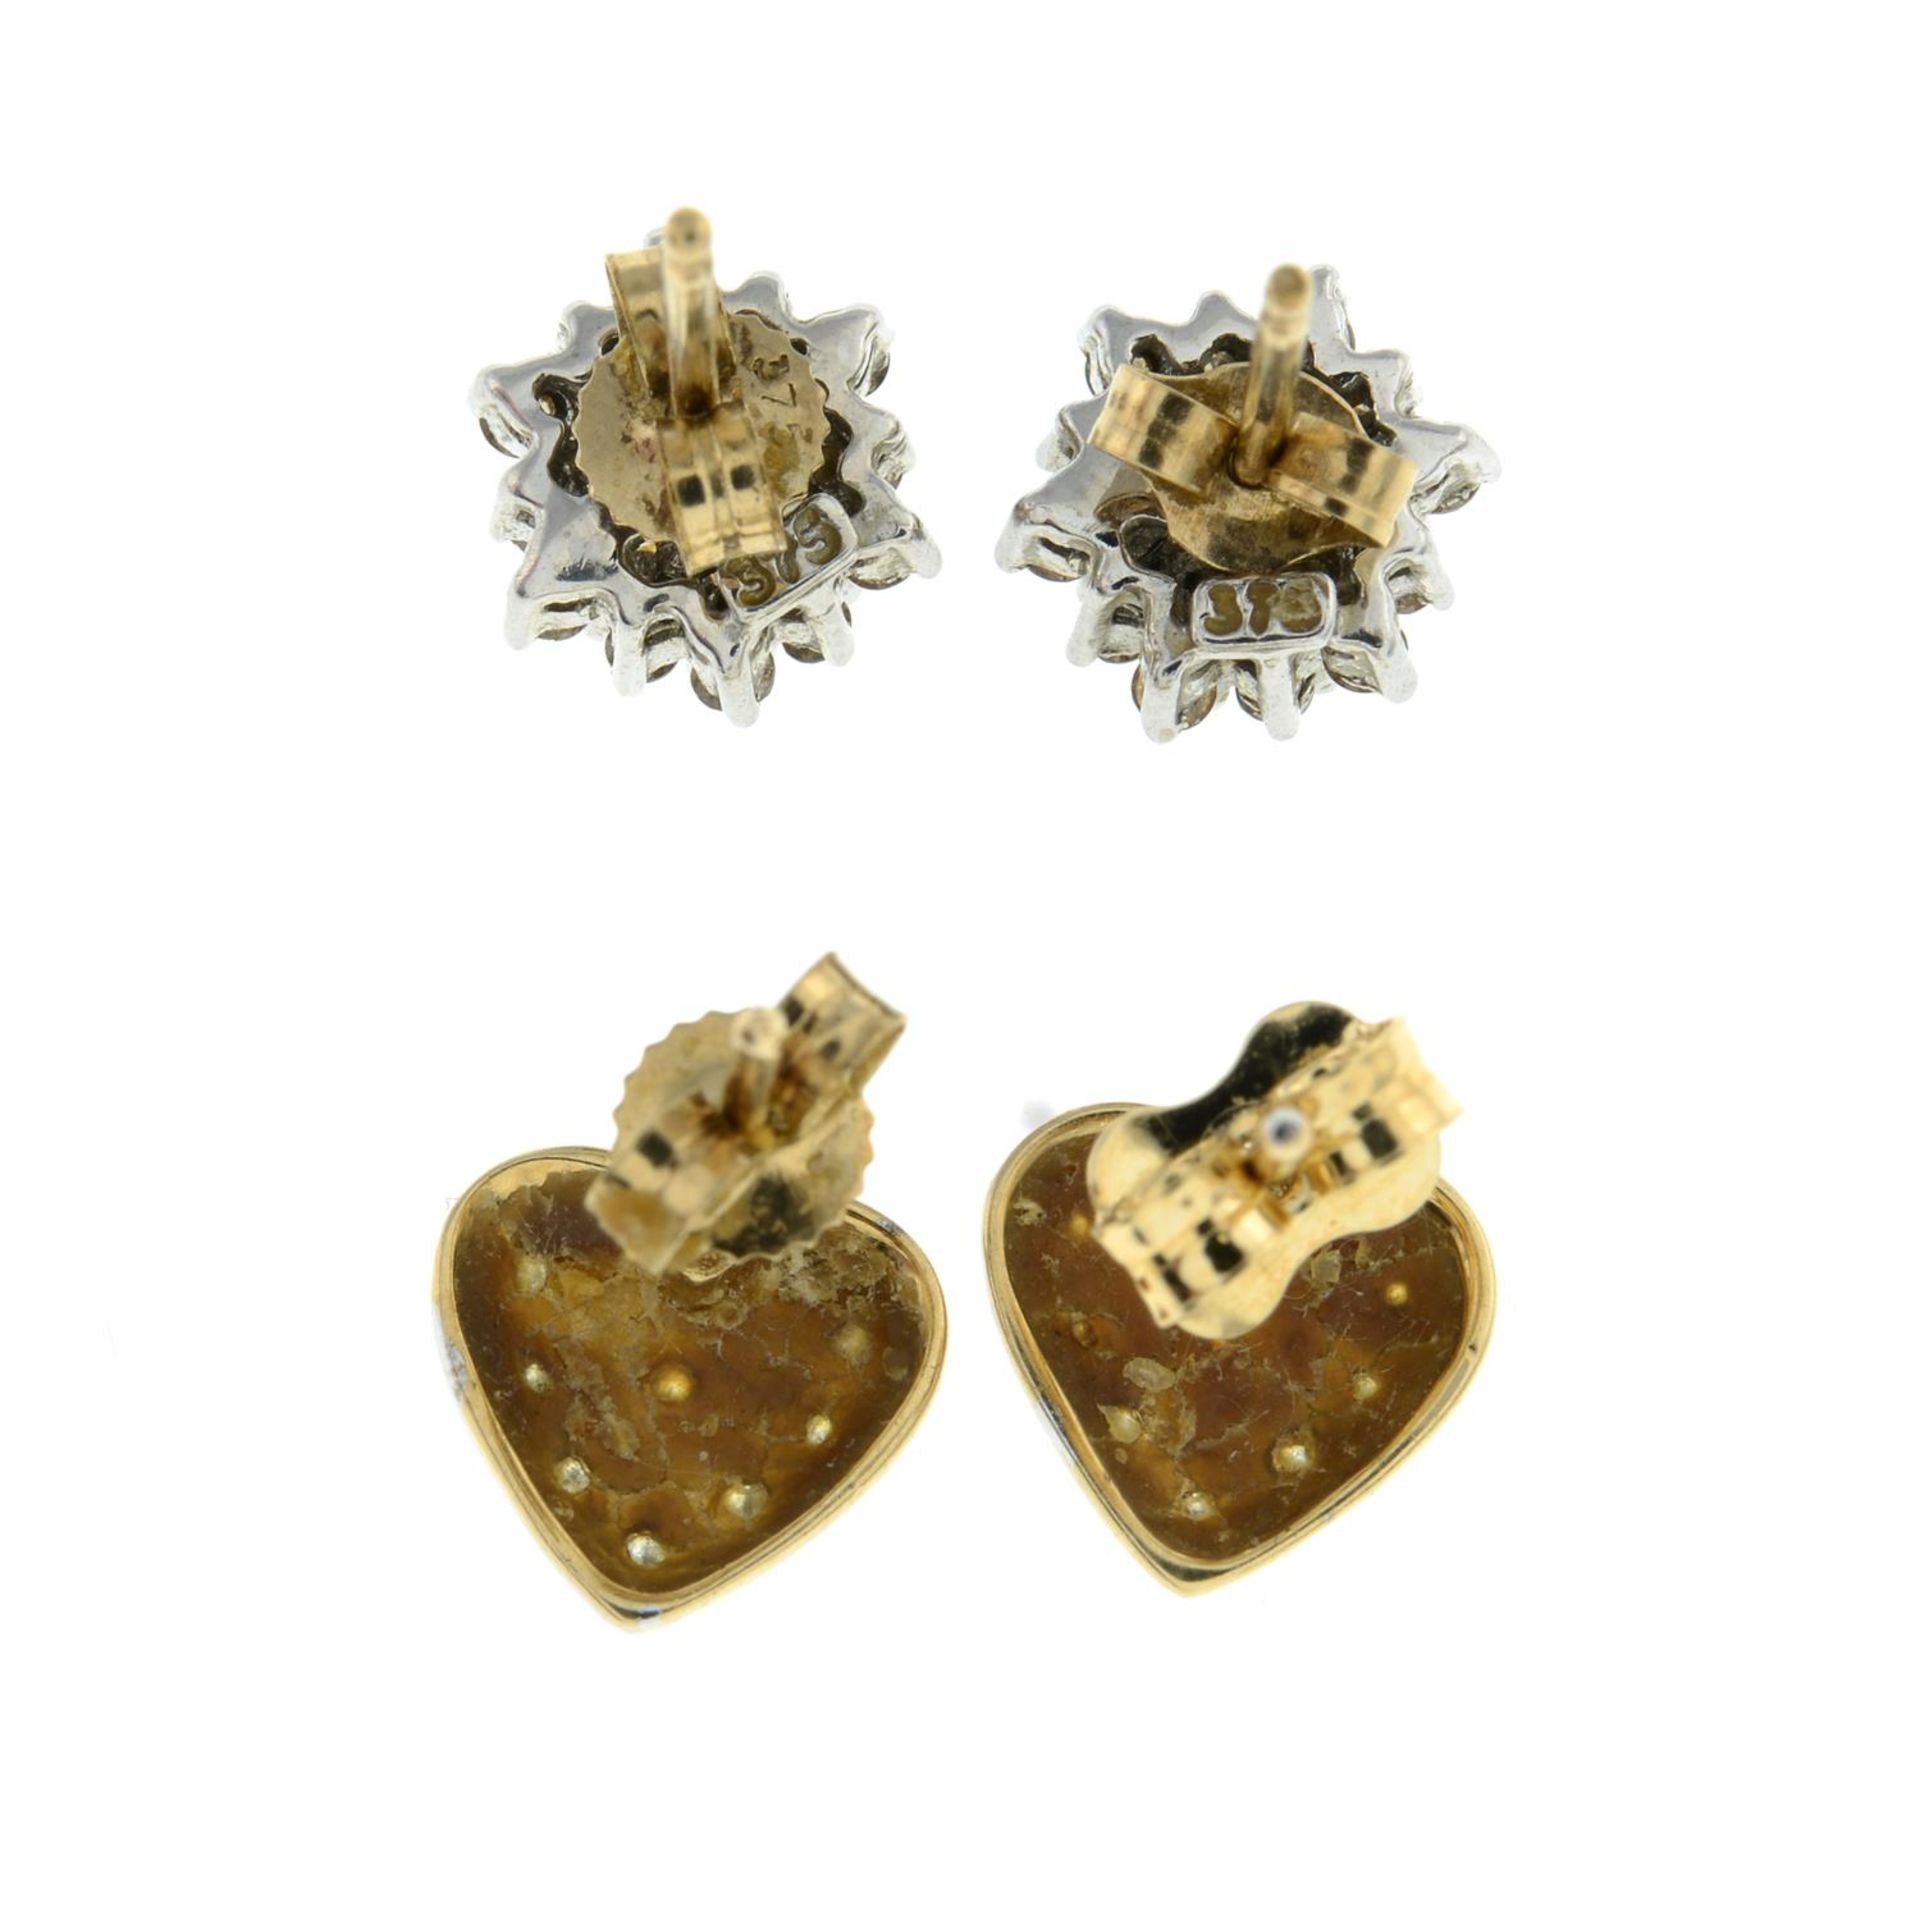 Two pairs of diamond earrings - Image 2 of 2